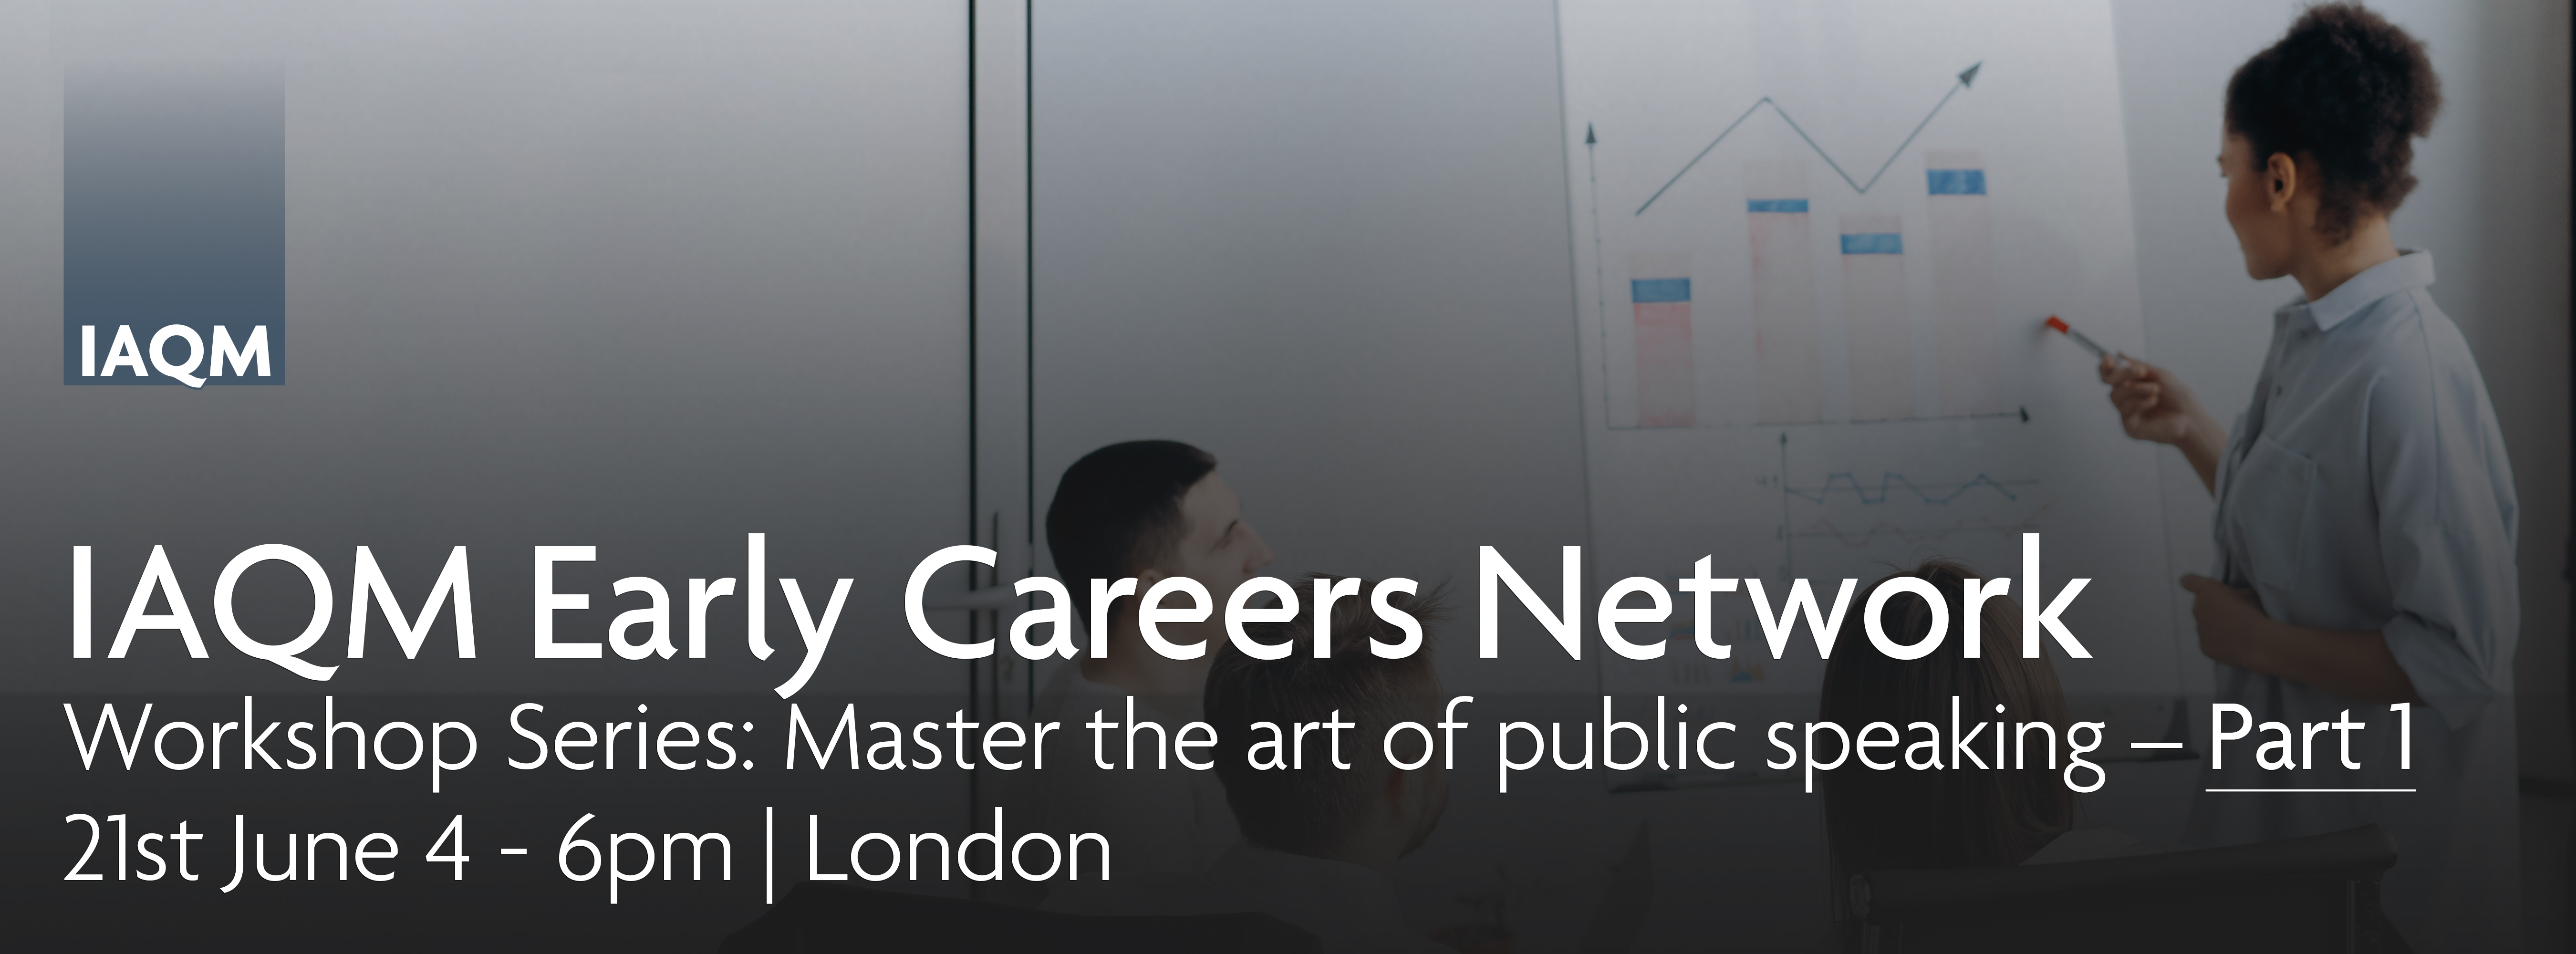 Female young professional presenting data to 3 other young professionals. Overlaid with text reading "IAQM Early Careers Network Workshop Series: Master the art of public speaking – Part 1. 21st June 4 - 6pm | London" Featuring the IAQM logo in the top right hand corner